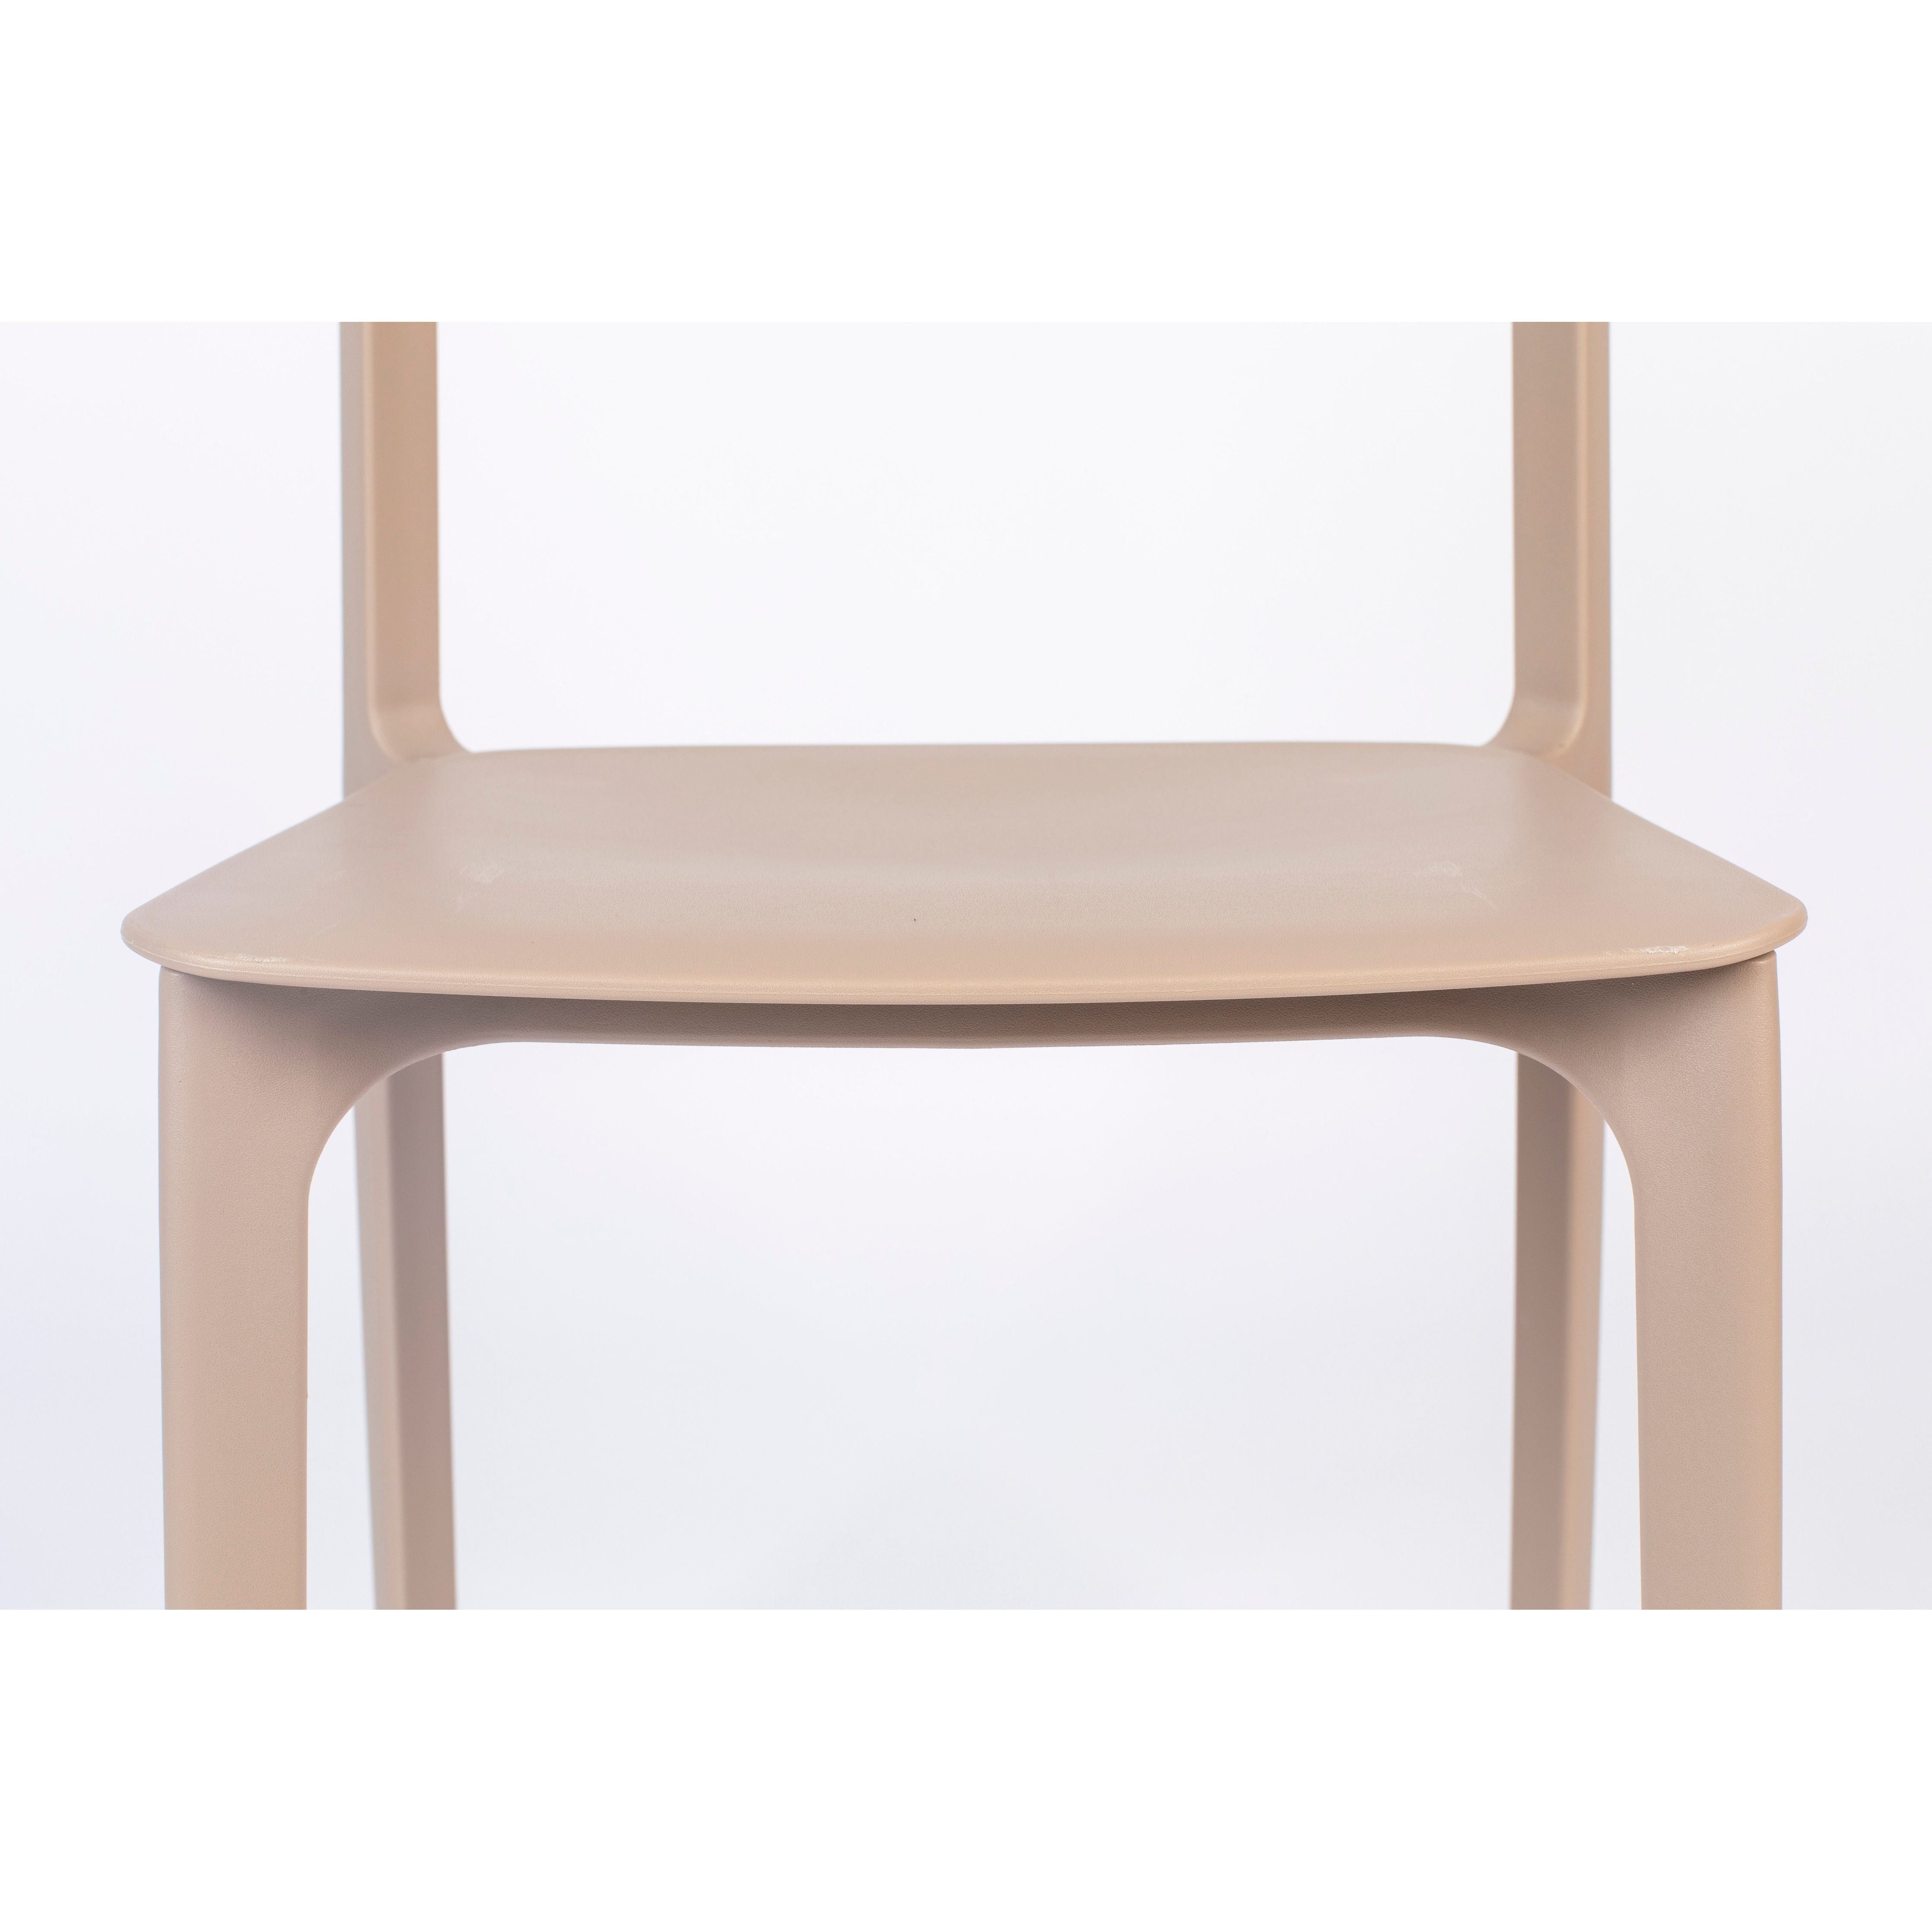 Chair clive light brown | 4 pieces